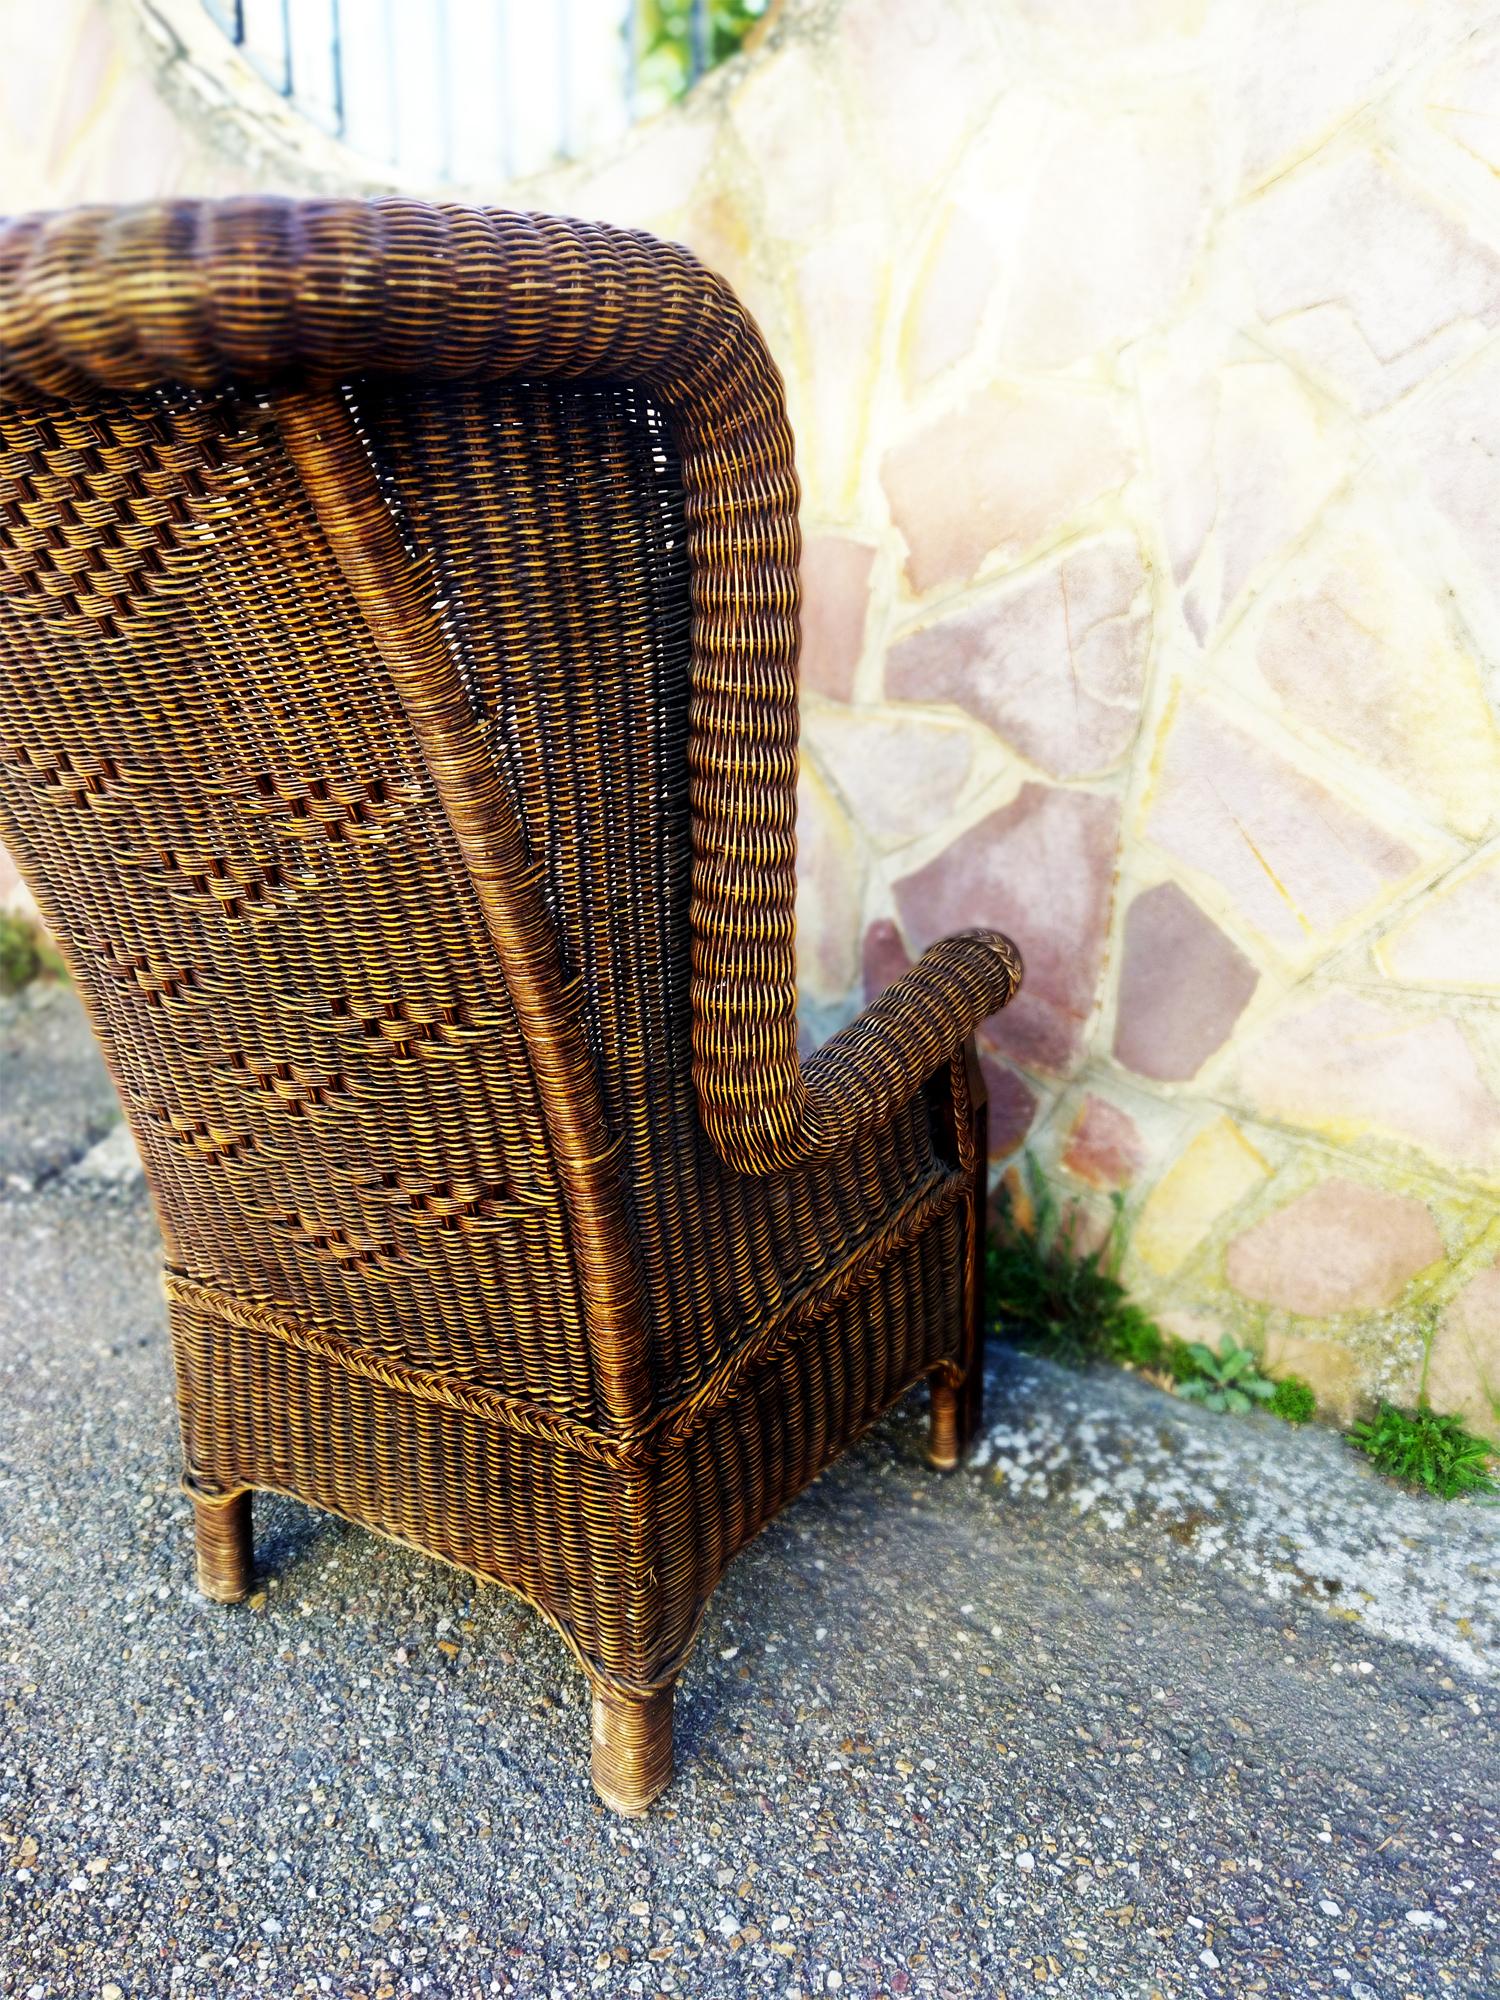 Spectacular large armchair,early 20th century or late 19th century

Antique wicker wing chair. With very high backrest and very wide seat, throne type. The height of the backrest is reminiscent of that of the old English Pub seats, even the woven